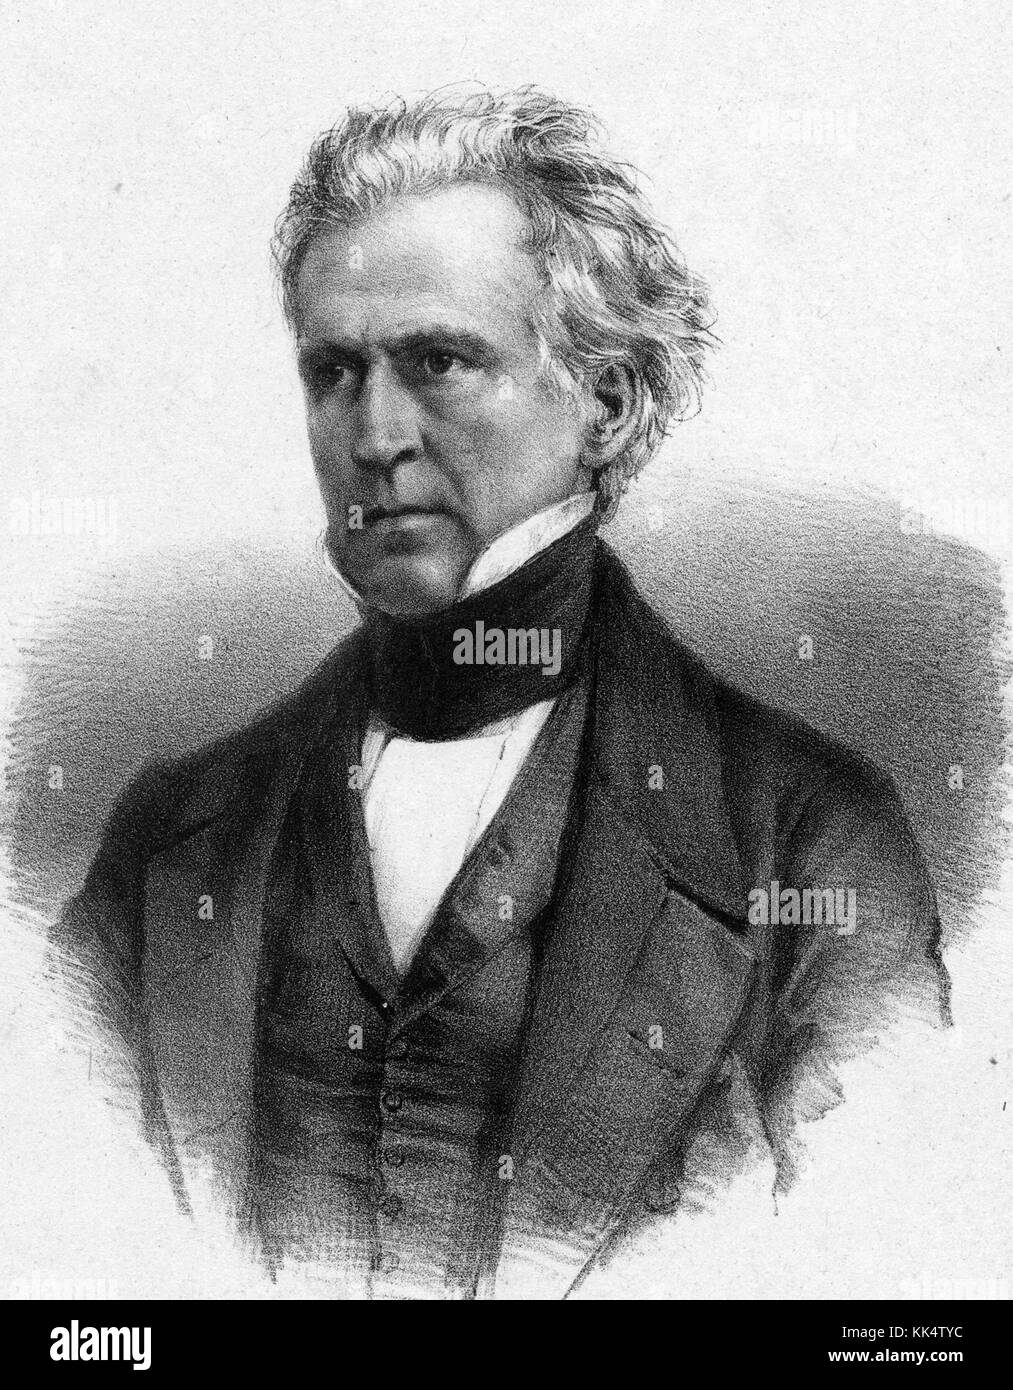 An engraving from a portrait of Jesup B Wakeman, he is wearing a black suit and white shirt, 1870. From the New York Public Library. Stock Photo